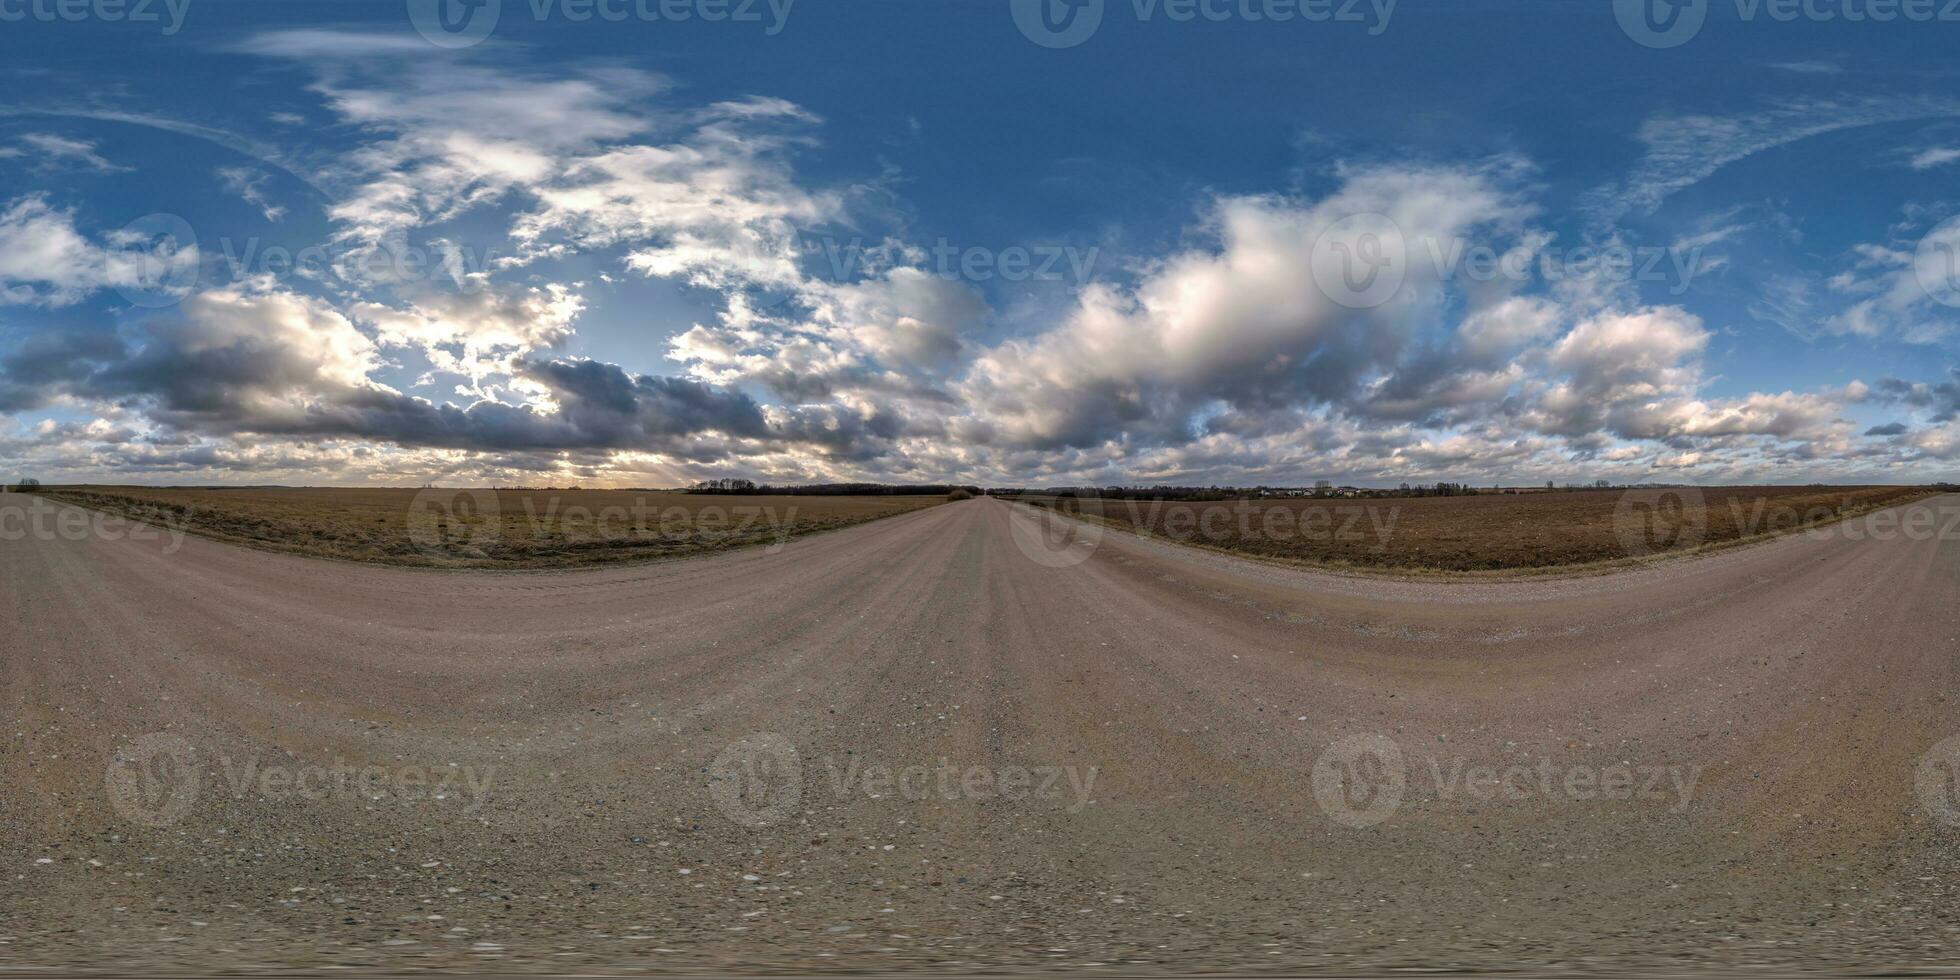 evening 360 hdri panorama on gravel road with clouds on blue sky before sunset in equirectangular spherical seamless projection, use as sky replacement in drone panoramas, game development as sky dome photo